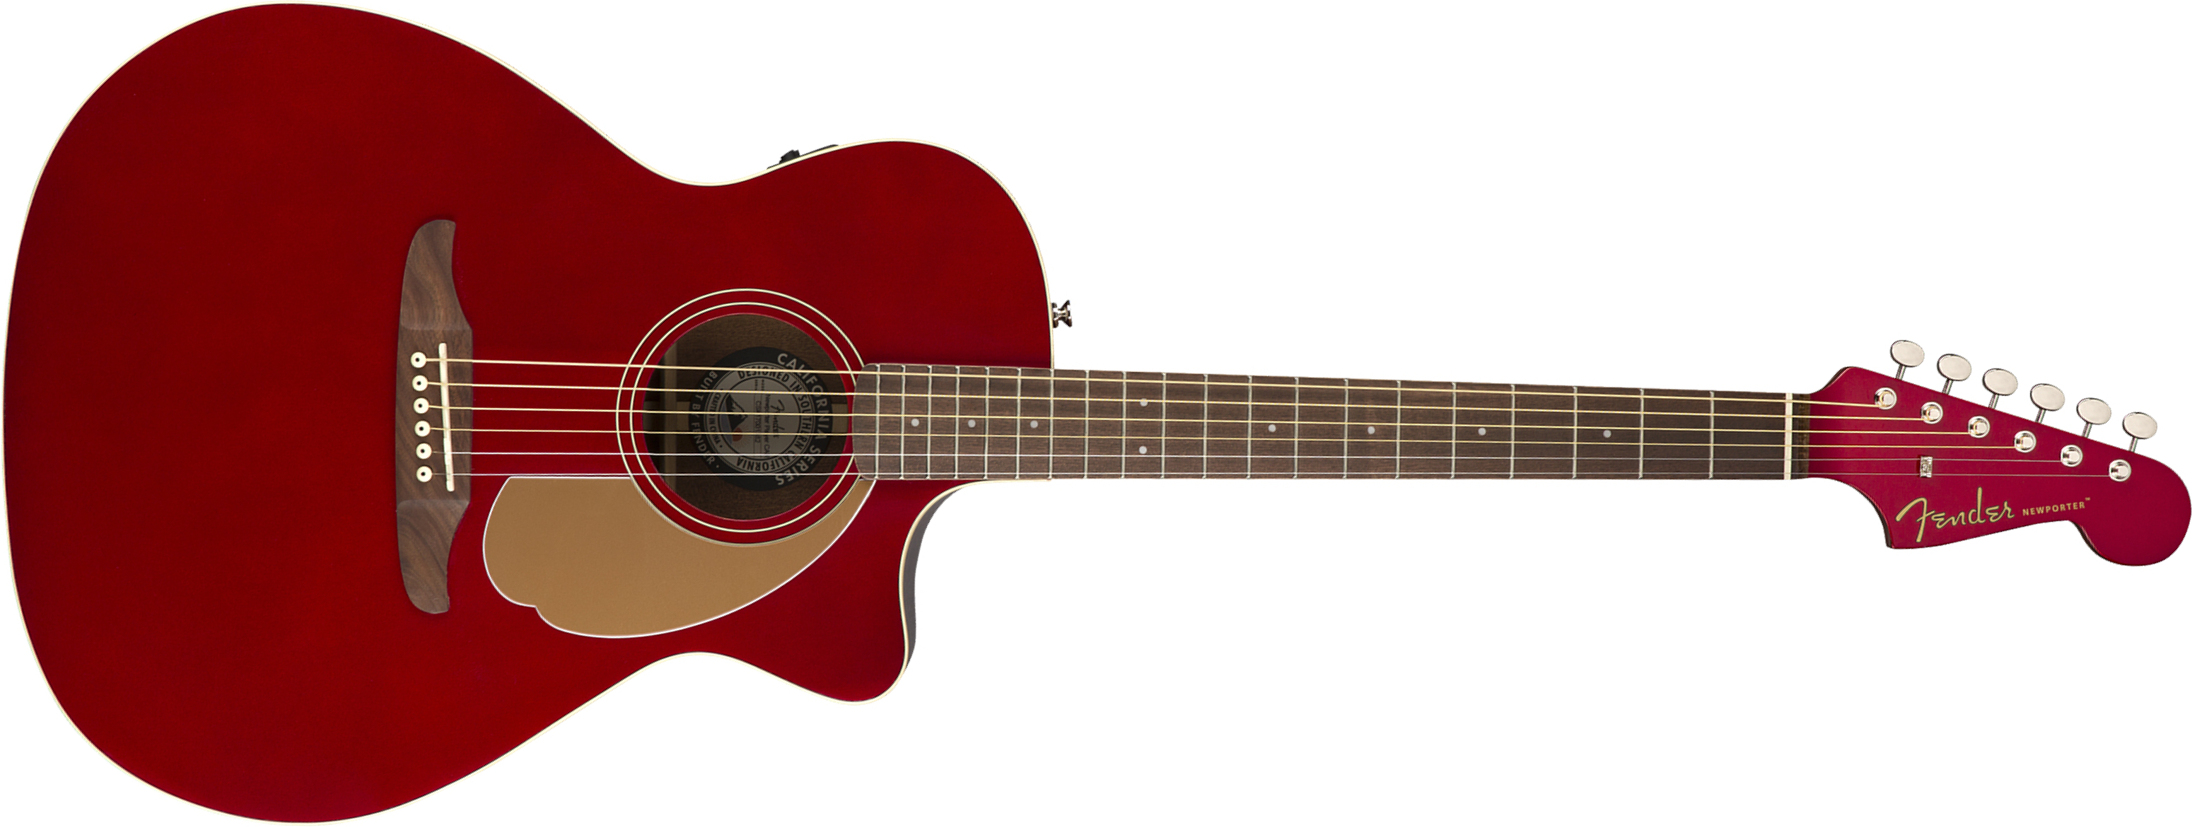 Fender Newporter Player Auditorium Cw Epicea Acajou Wal - Candy Apple Red - Electro acoustic guitar - Main picture